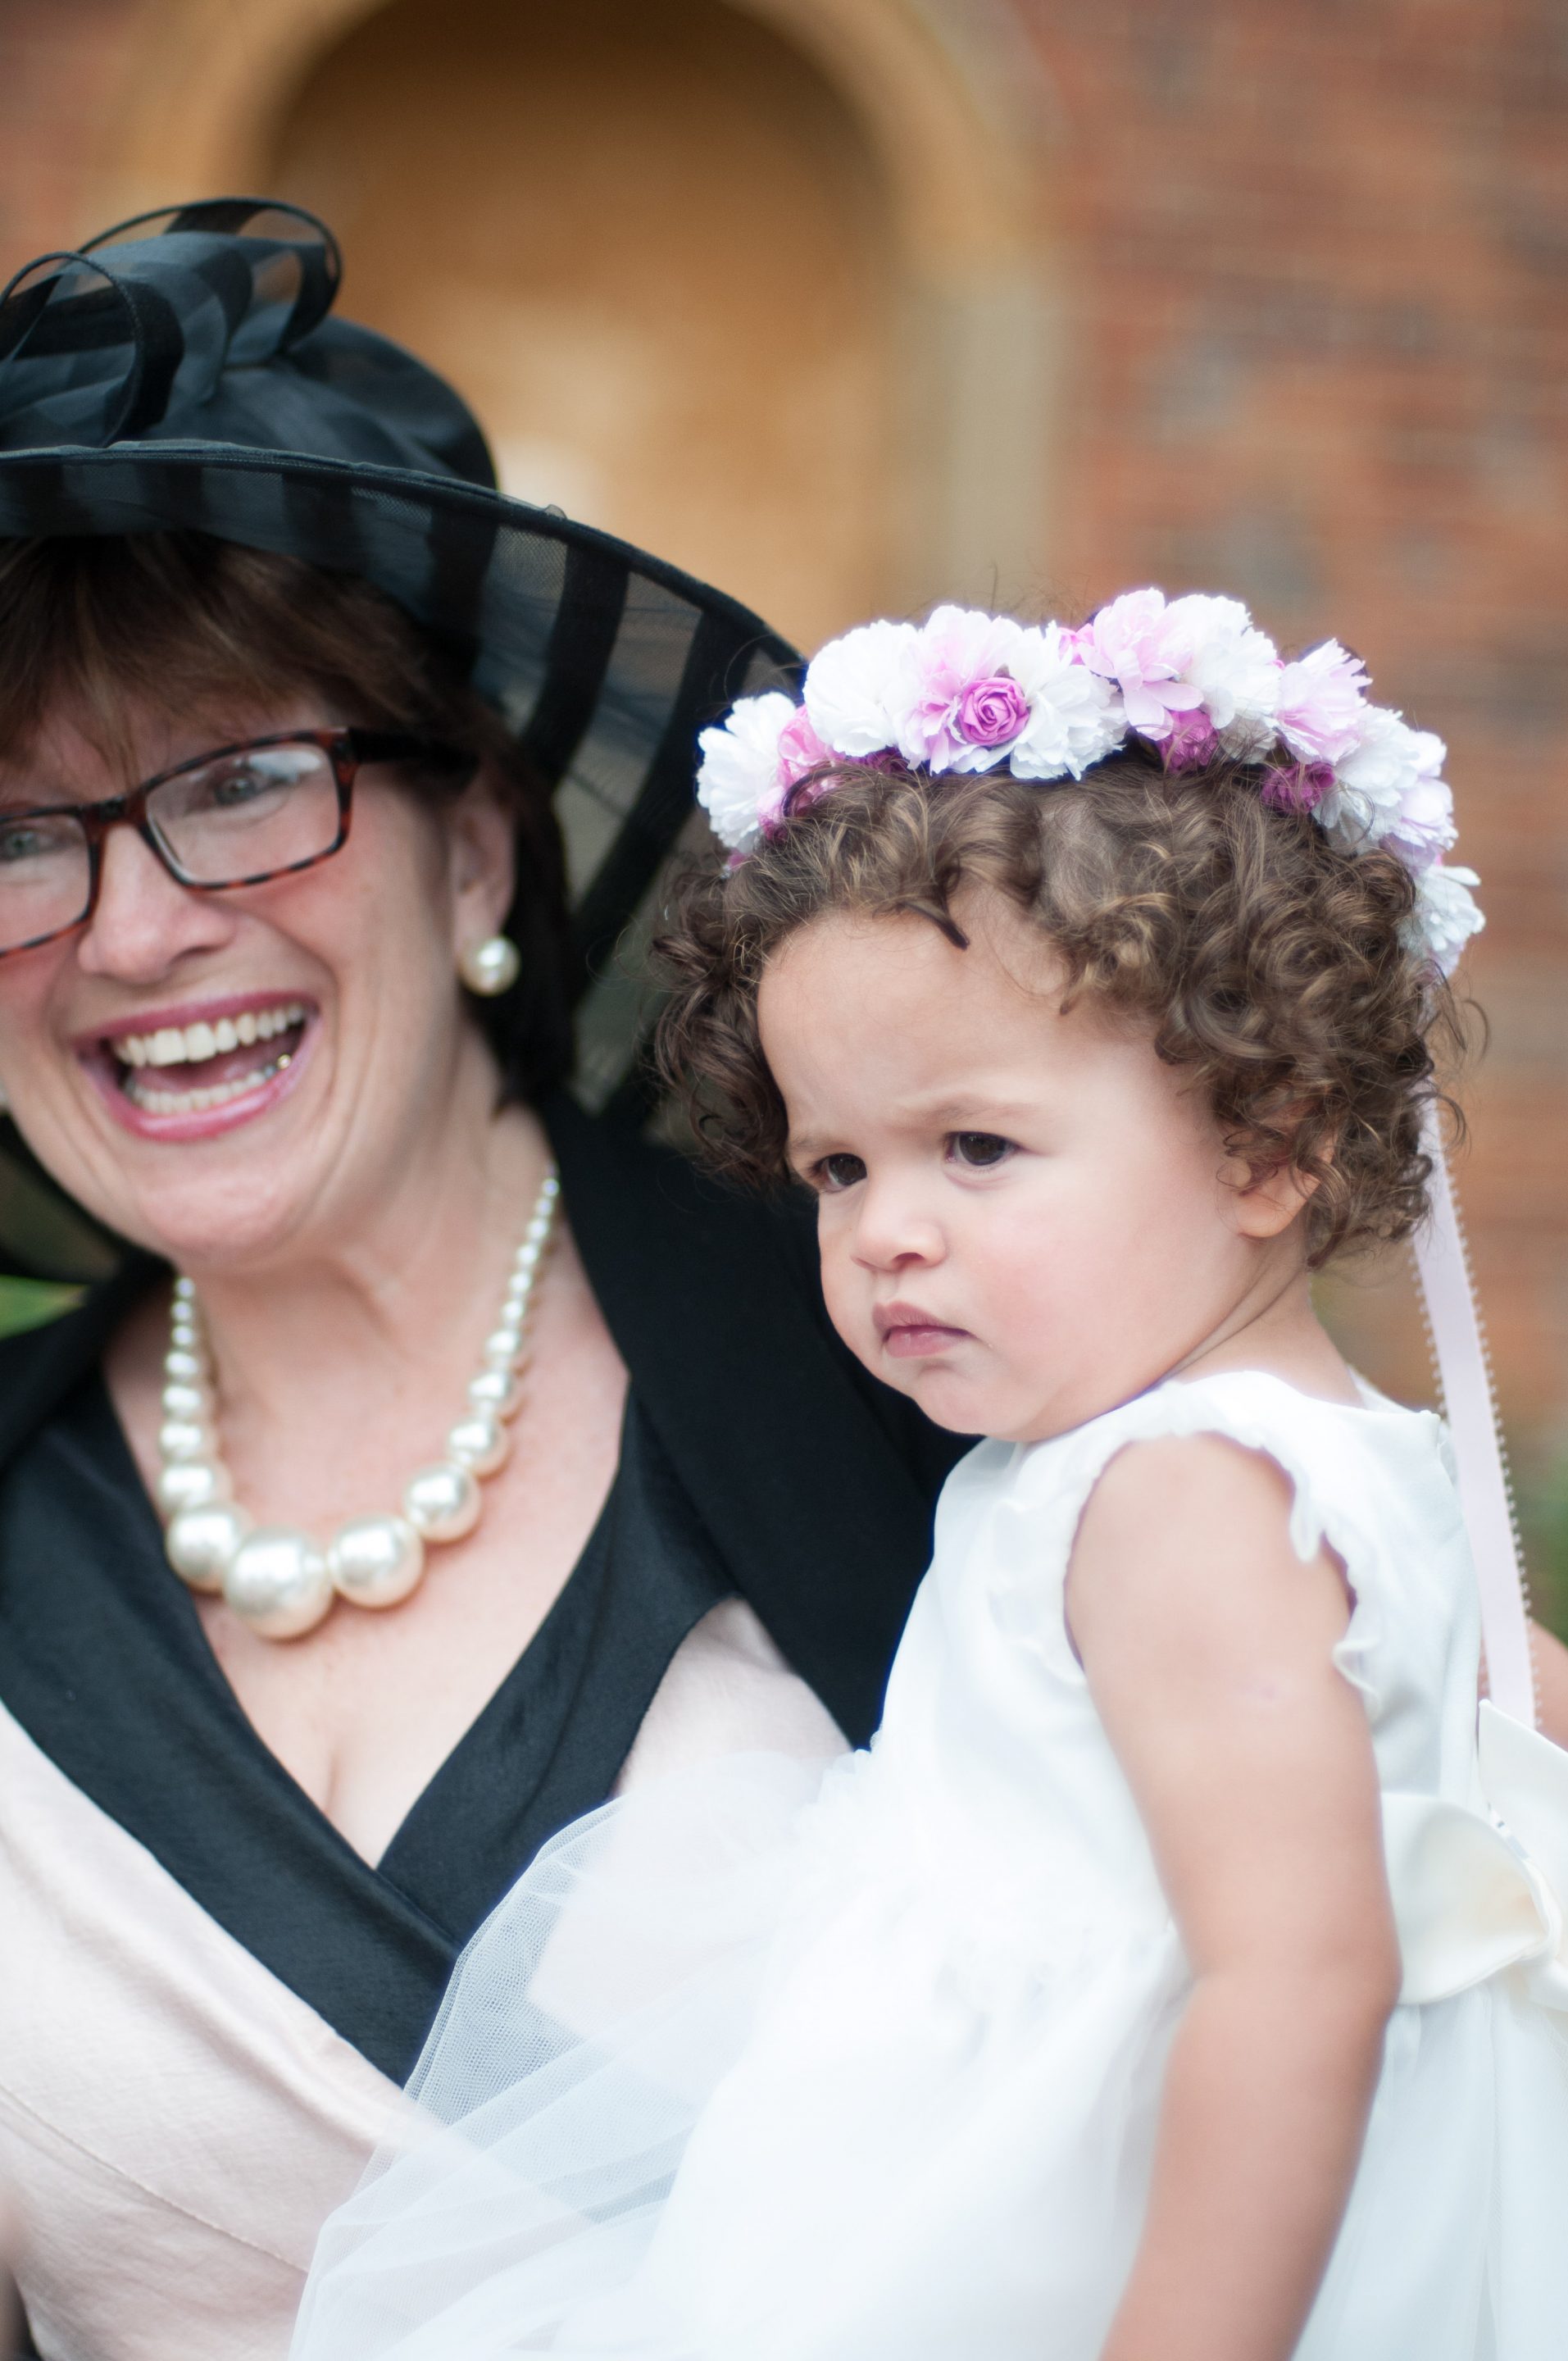 Daughter of the bride and her grandmother